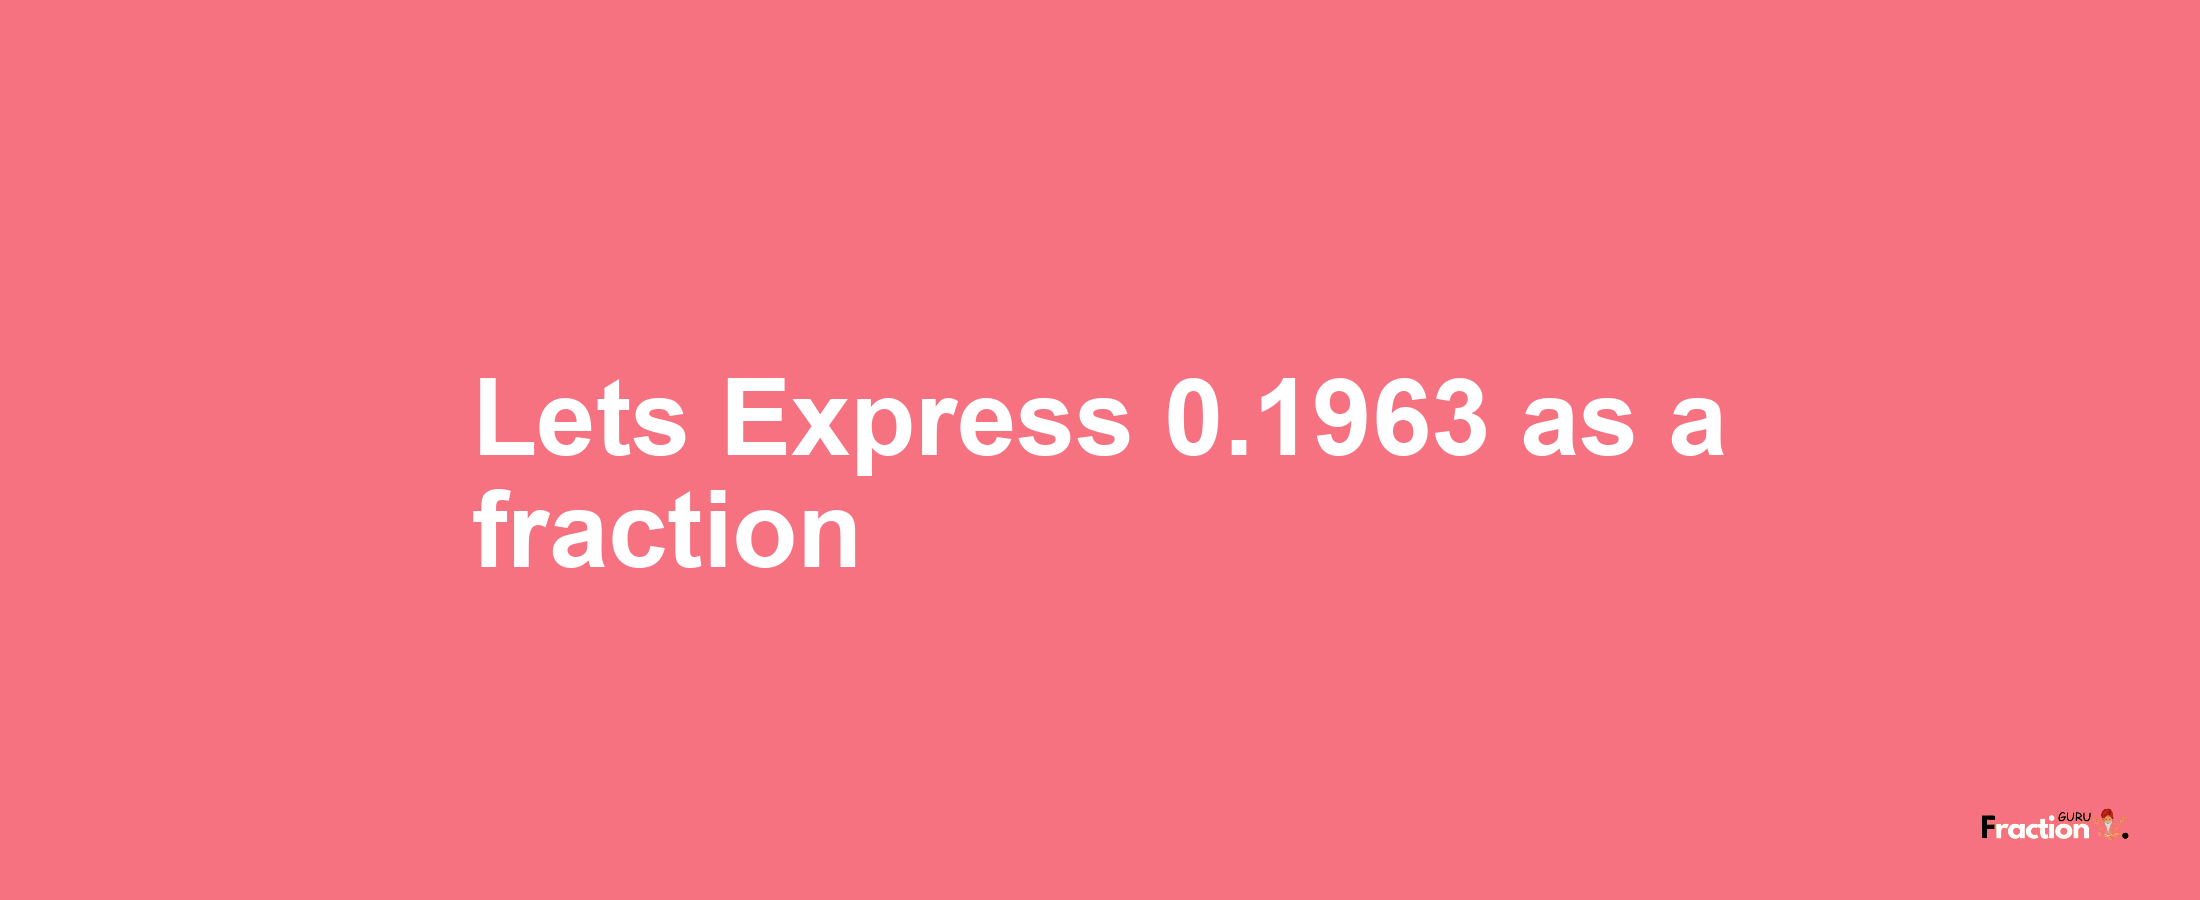 Lets Express 0.1963 as afraction